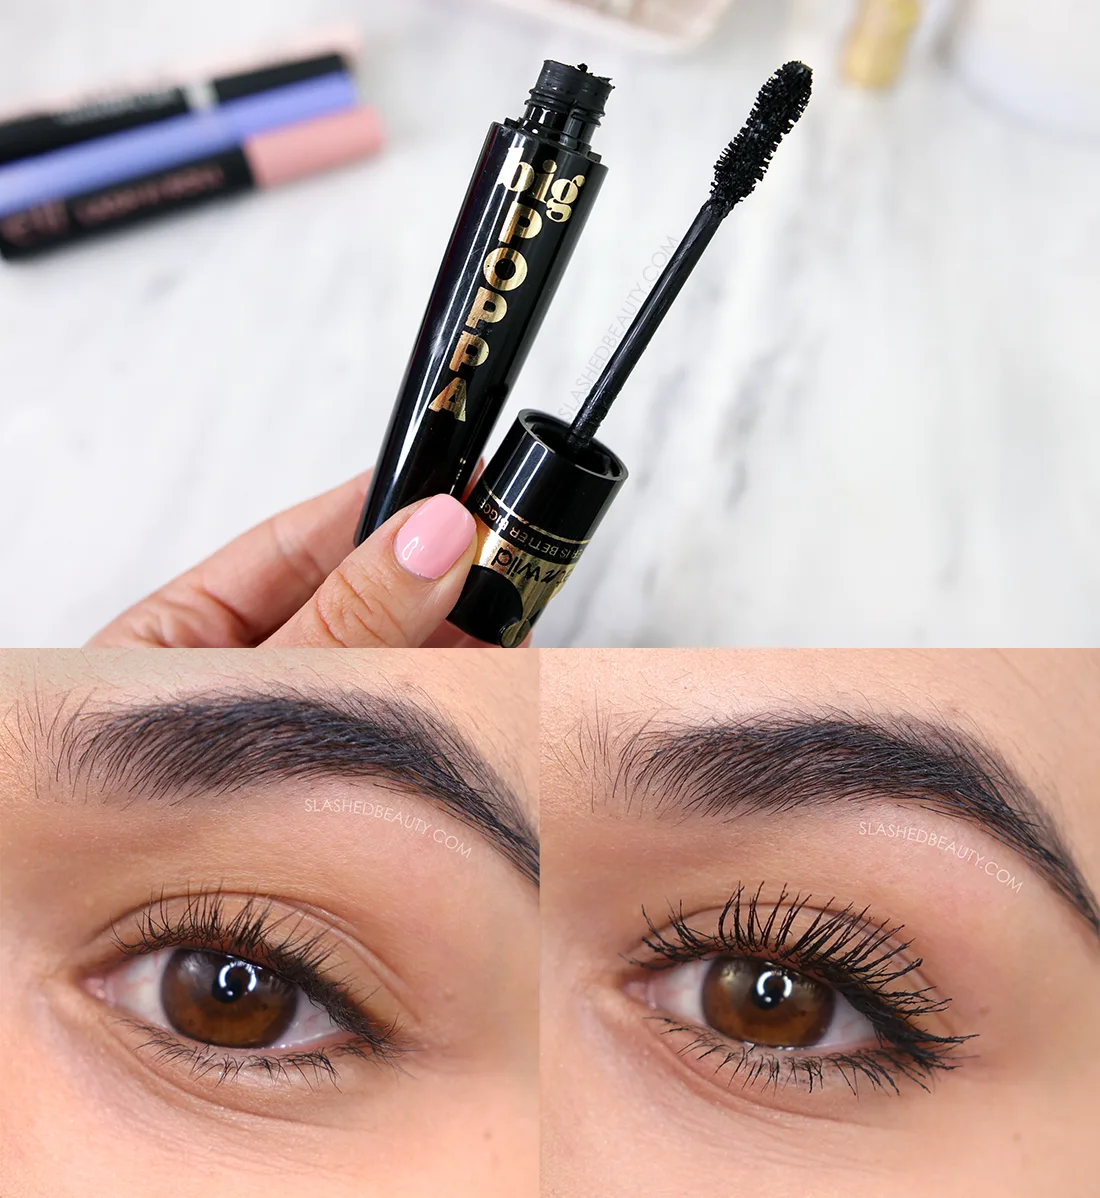 Open tube of wet n wild Big Poppa Mascara with close up before & after | The 5 Best Drugstore Mascaras for Short Lashes in 2023 | Slashed Beauty